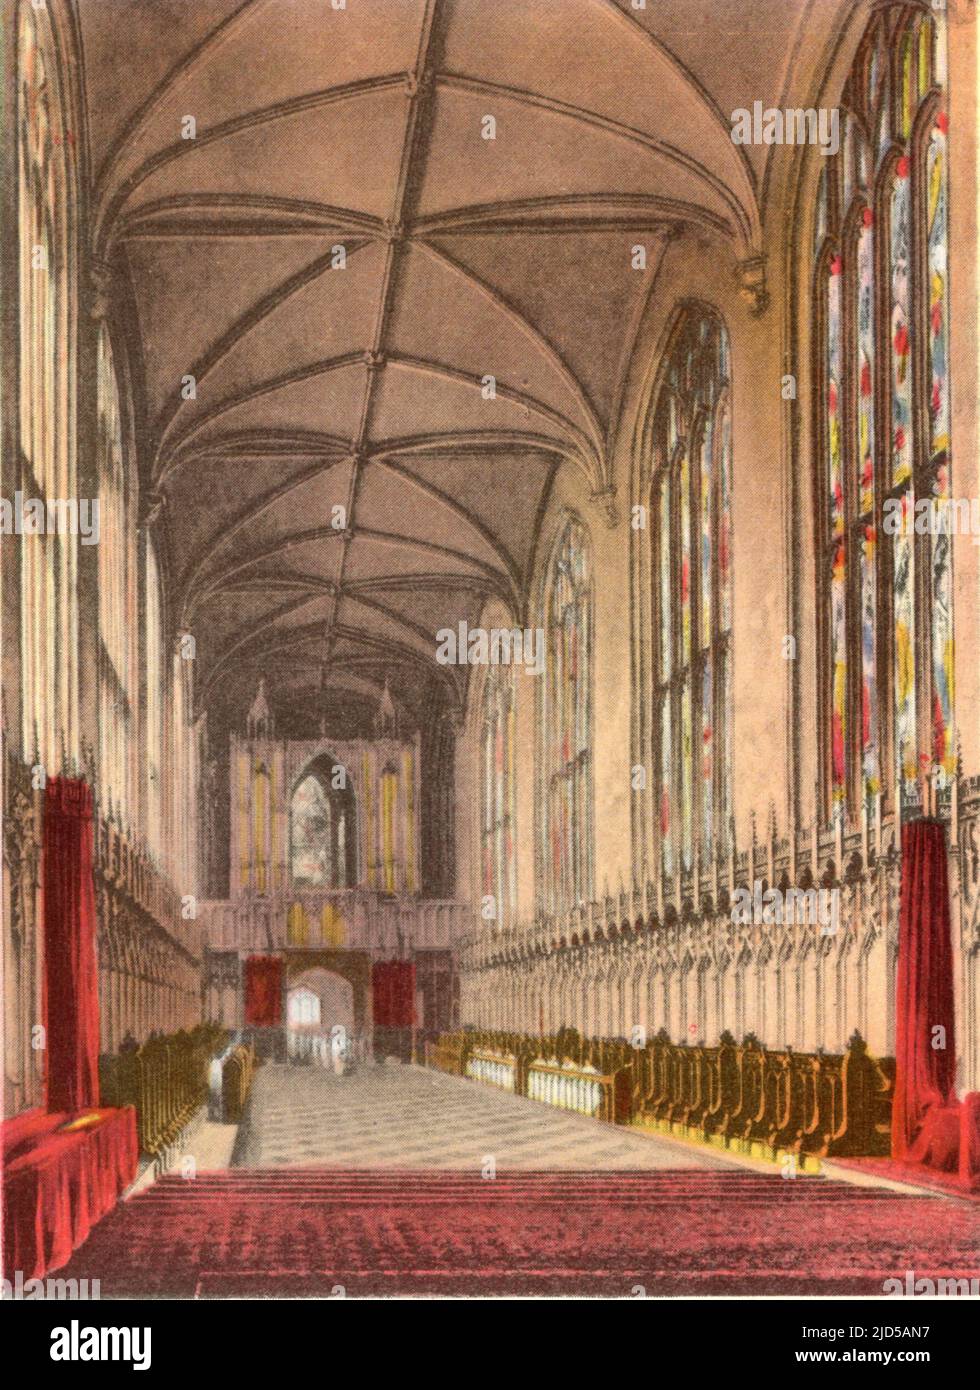 New College Chapel, 1814. New College is one of the constituent colleges of the University of Oxford, England. The college was founded in 1379 by William of Wykeham. The interior of the chapel contains works by Sir Jacob Epstein, El Greco and Sir Joshua Reynolds. A print from 'A History of the University of Oxford, its Colleges, Halls, and Public Buildings', published by Rudolph Ackermann, 1814. Ilustrated by Augustus Pugin, F. Mackenzie and others. Stock Photo